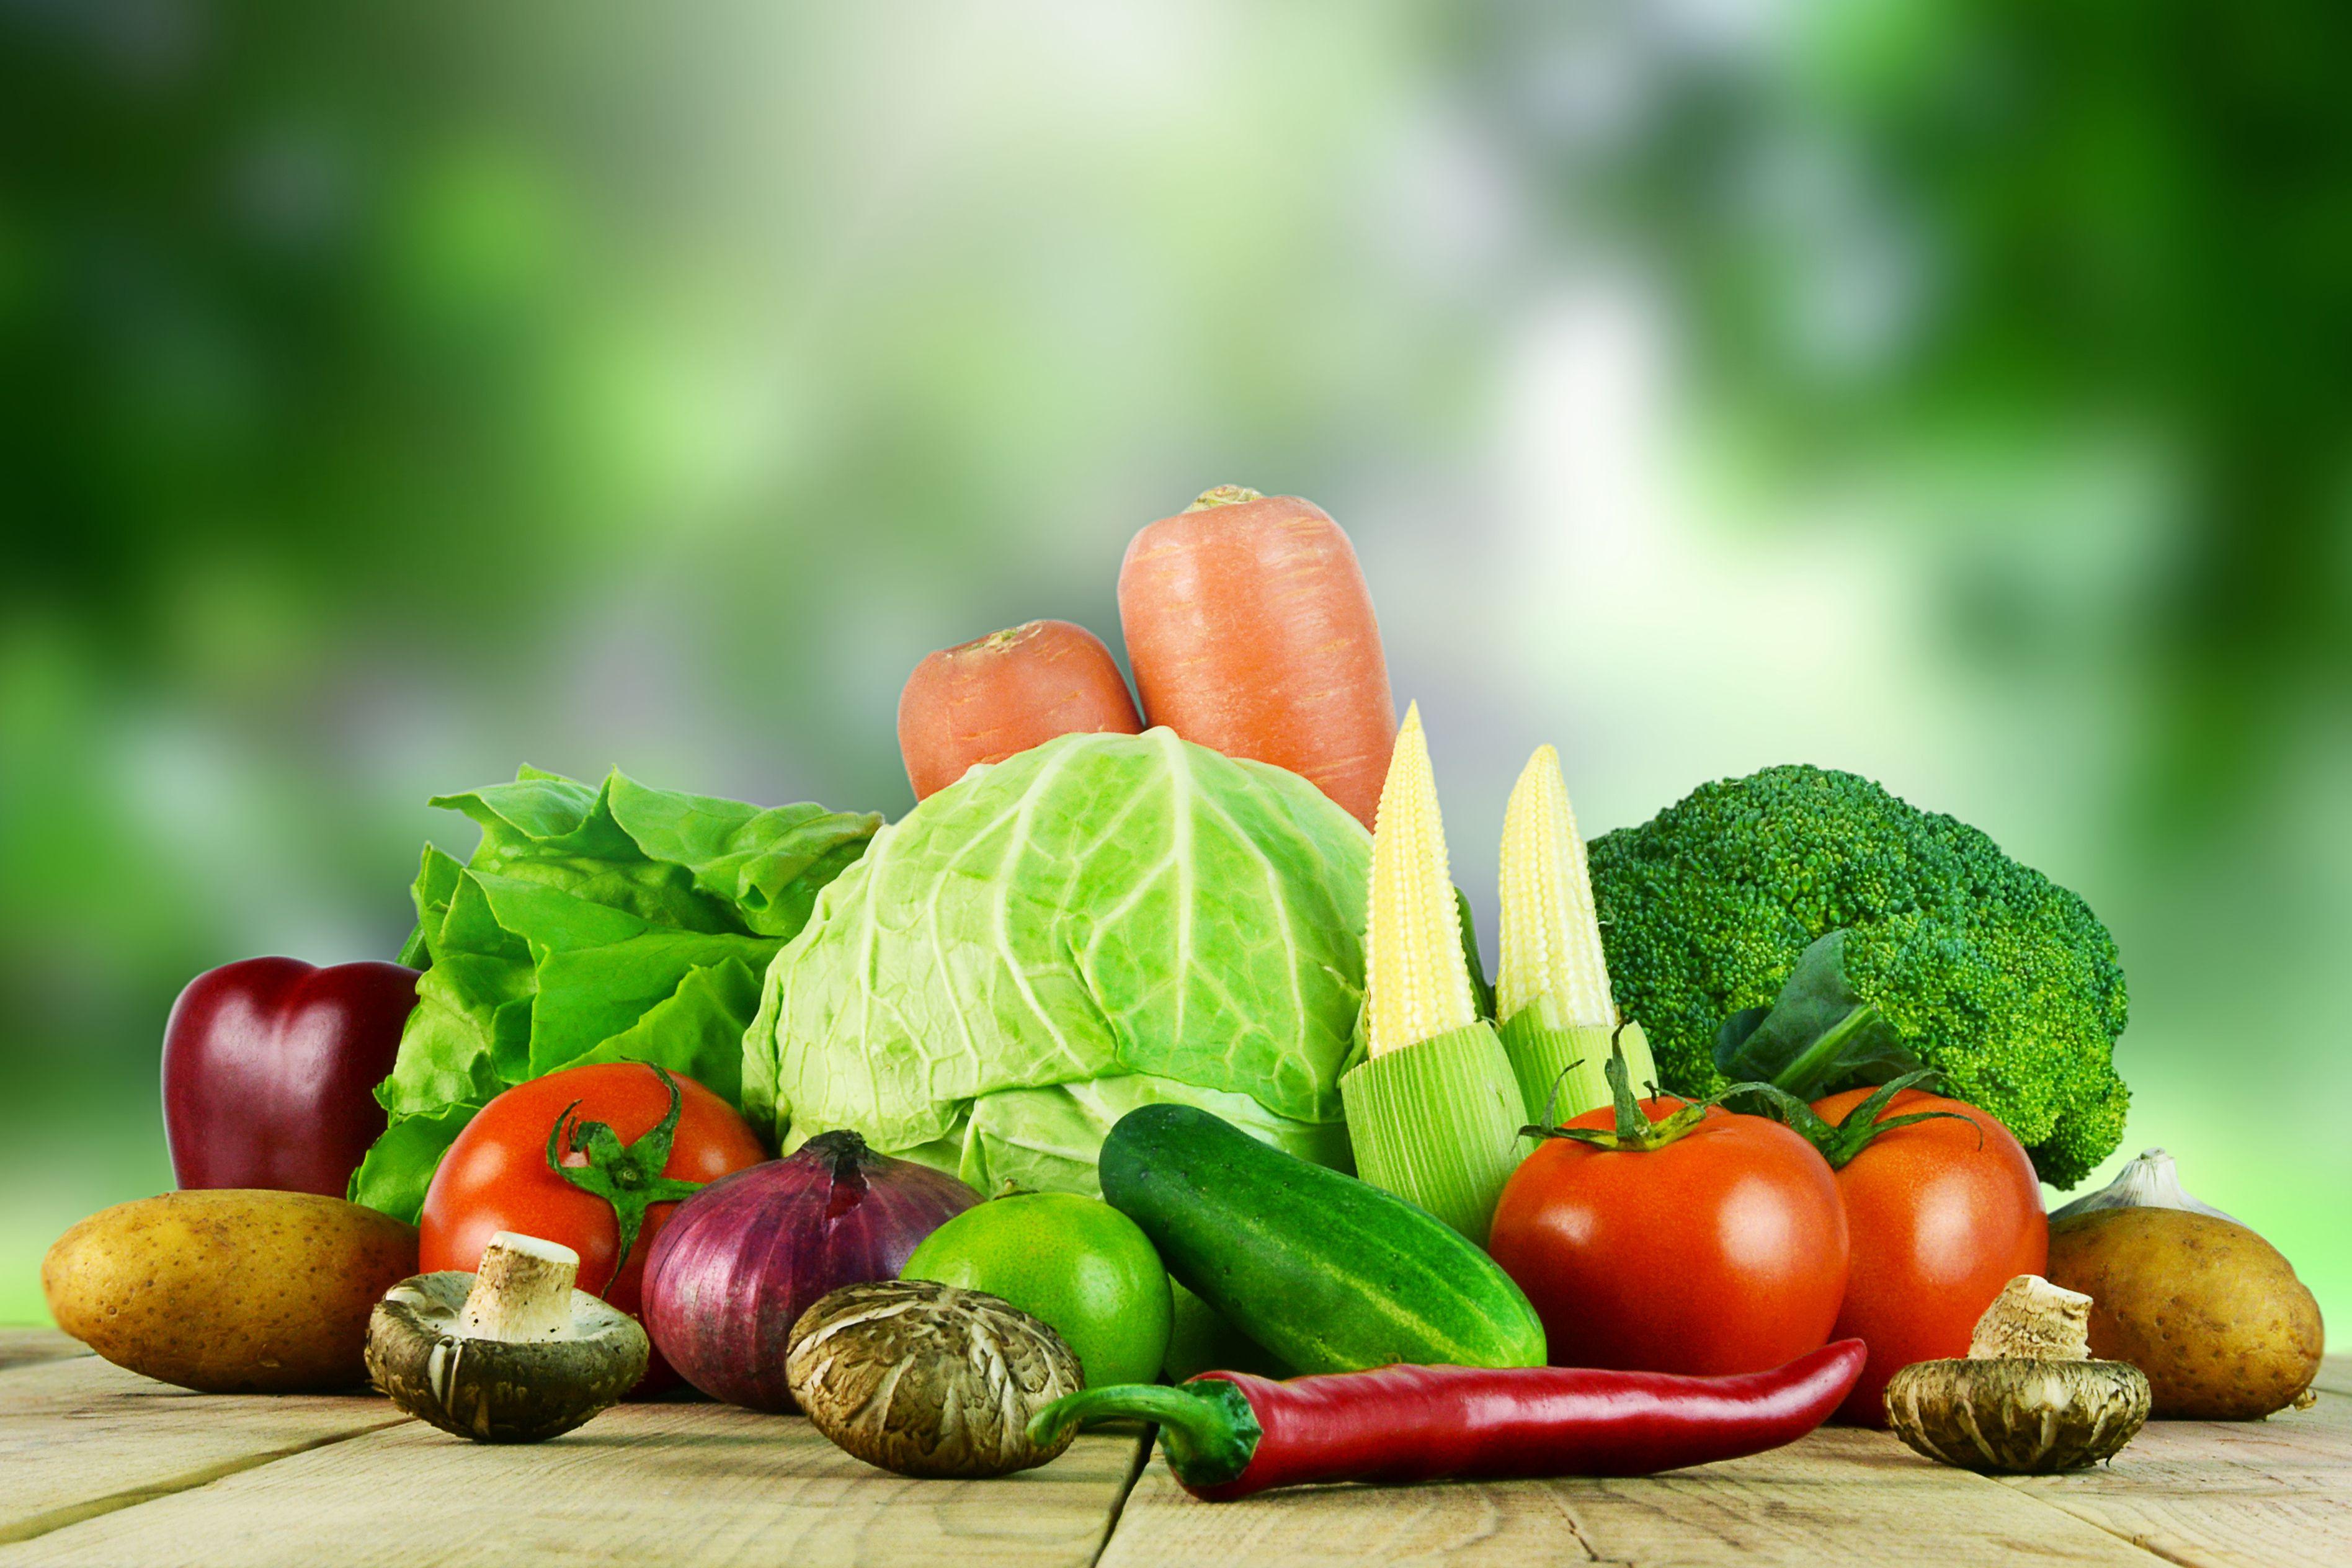 Fresh vegetables on the table wallpaper and image